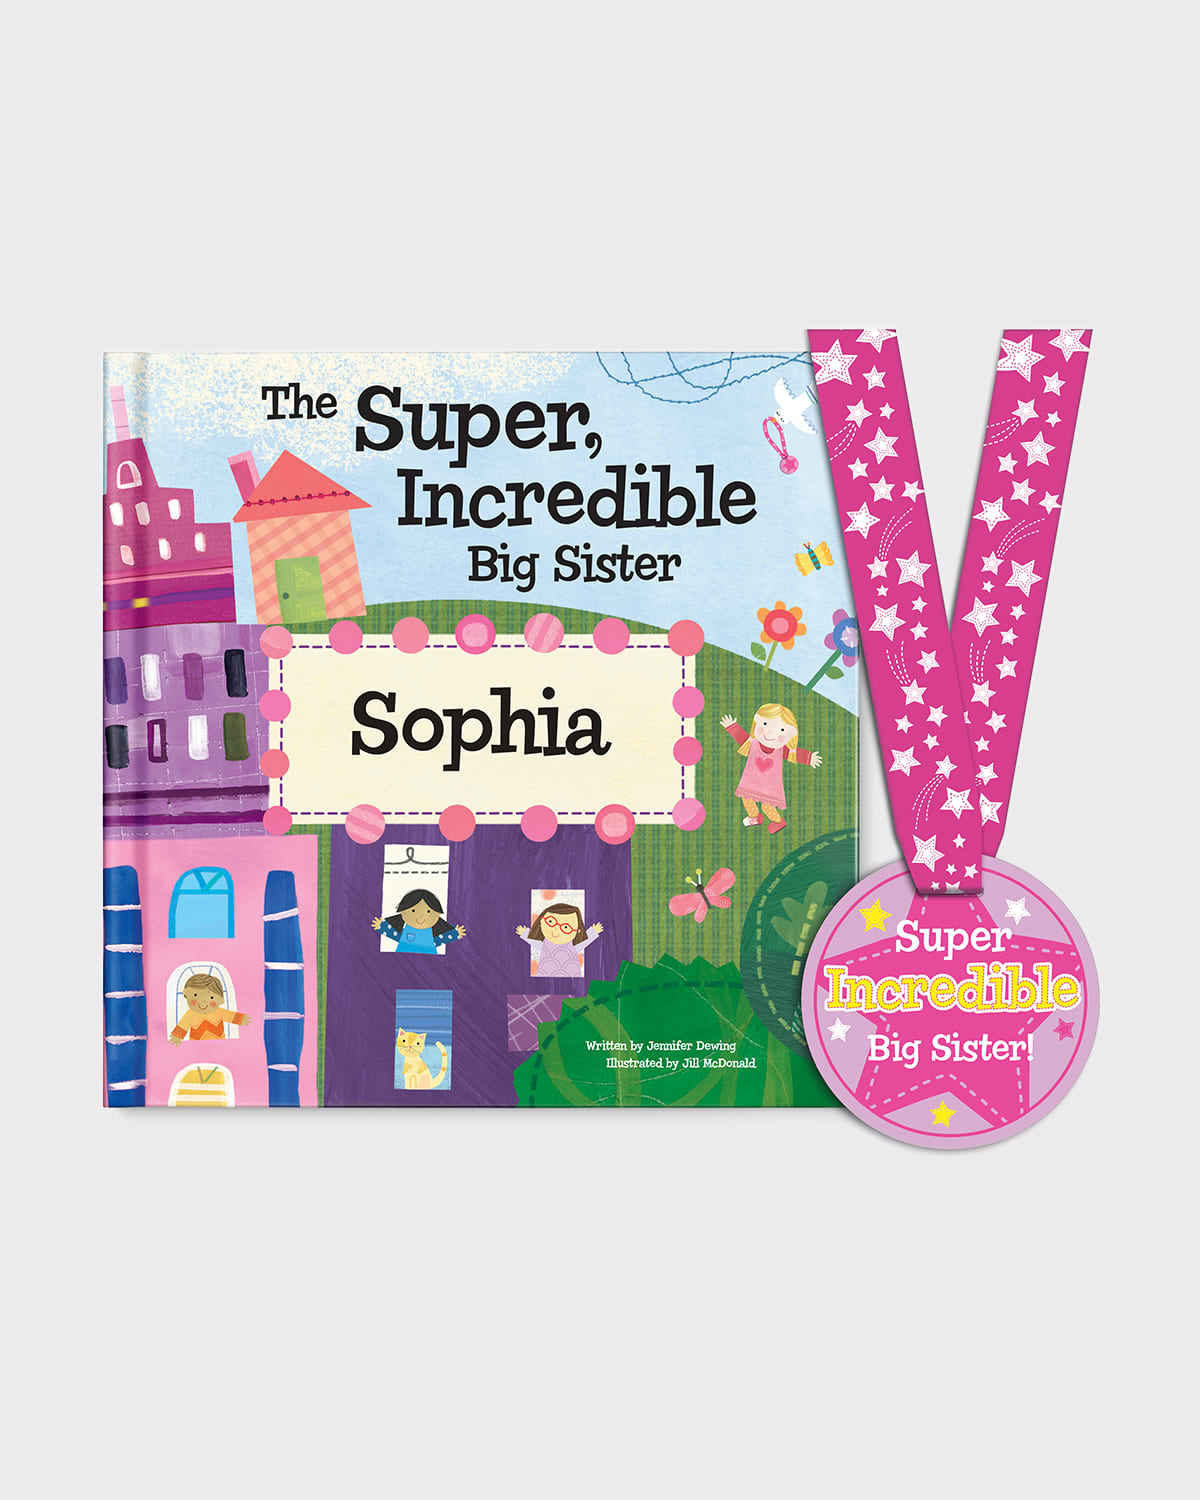 "The Super Incredible Big Sister" Book by Jennifer Dewing, Personalized